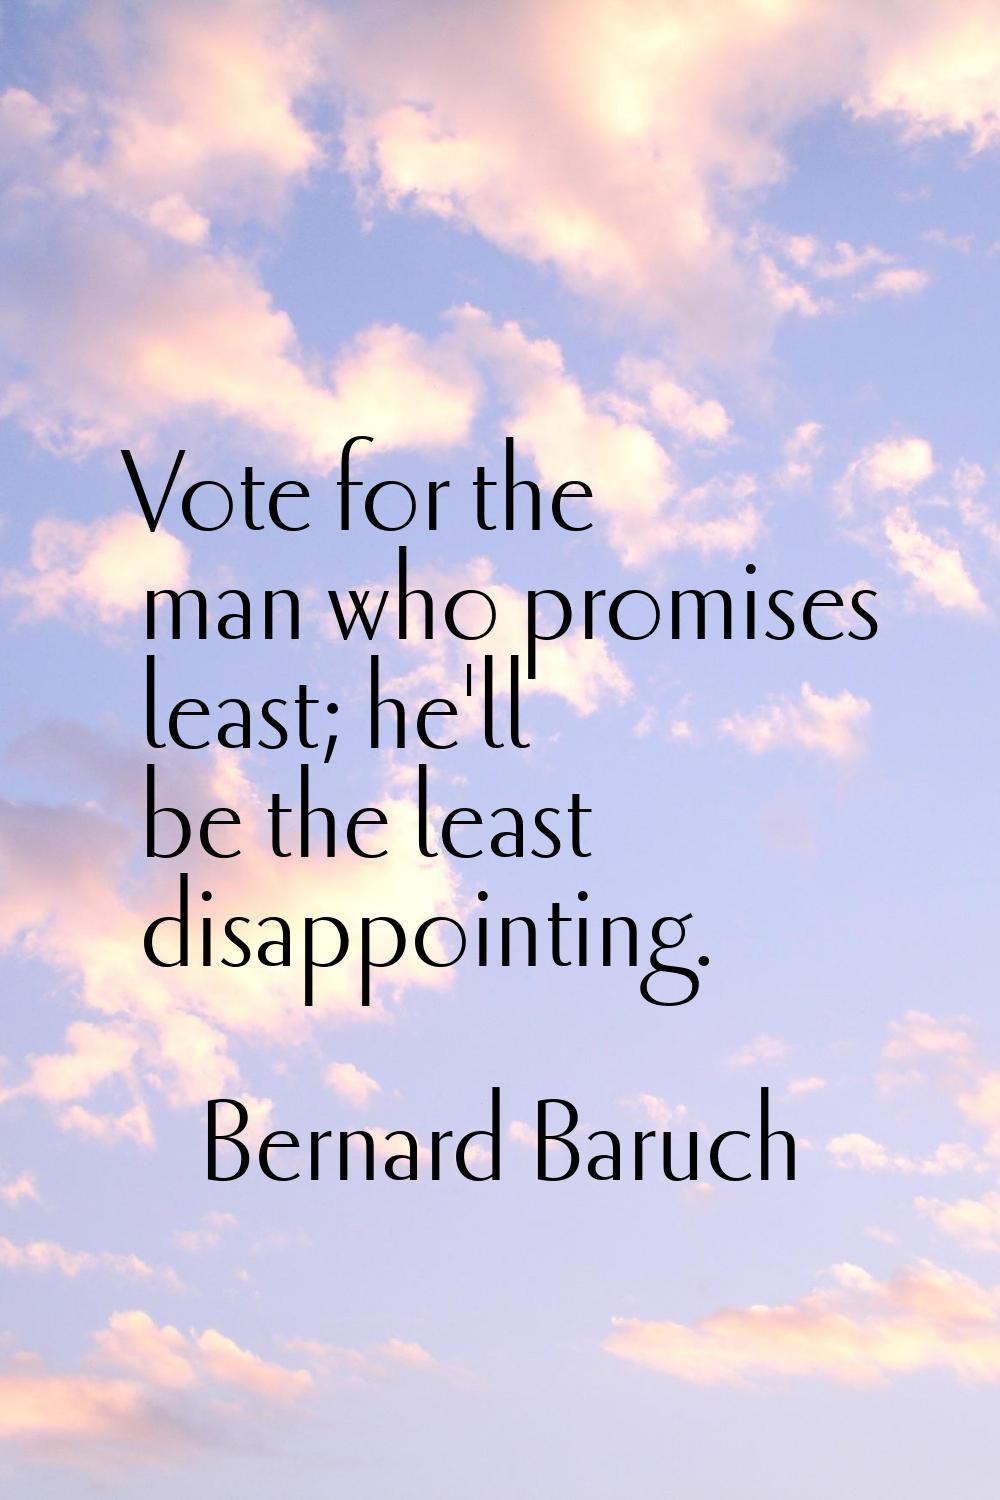 Vote for the man who promises least; he'll be the least disappointing.